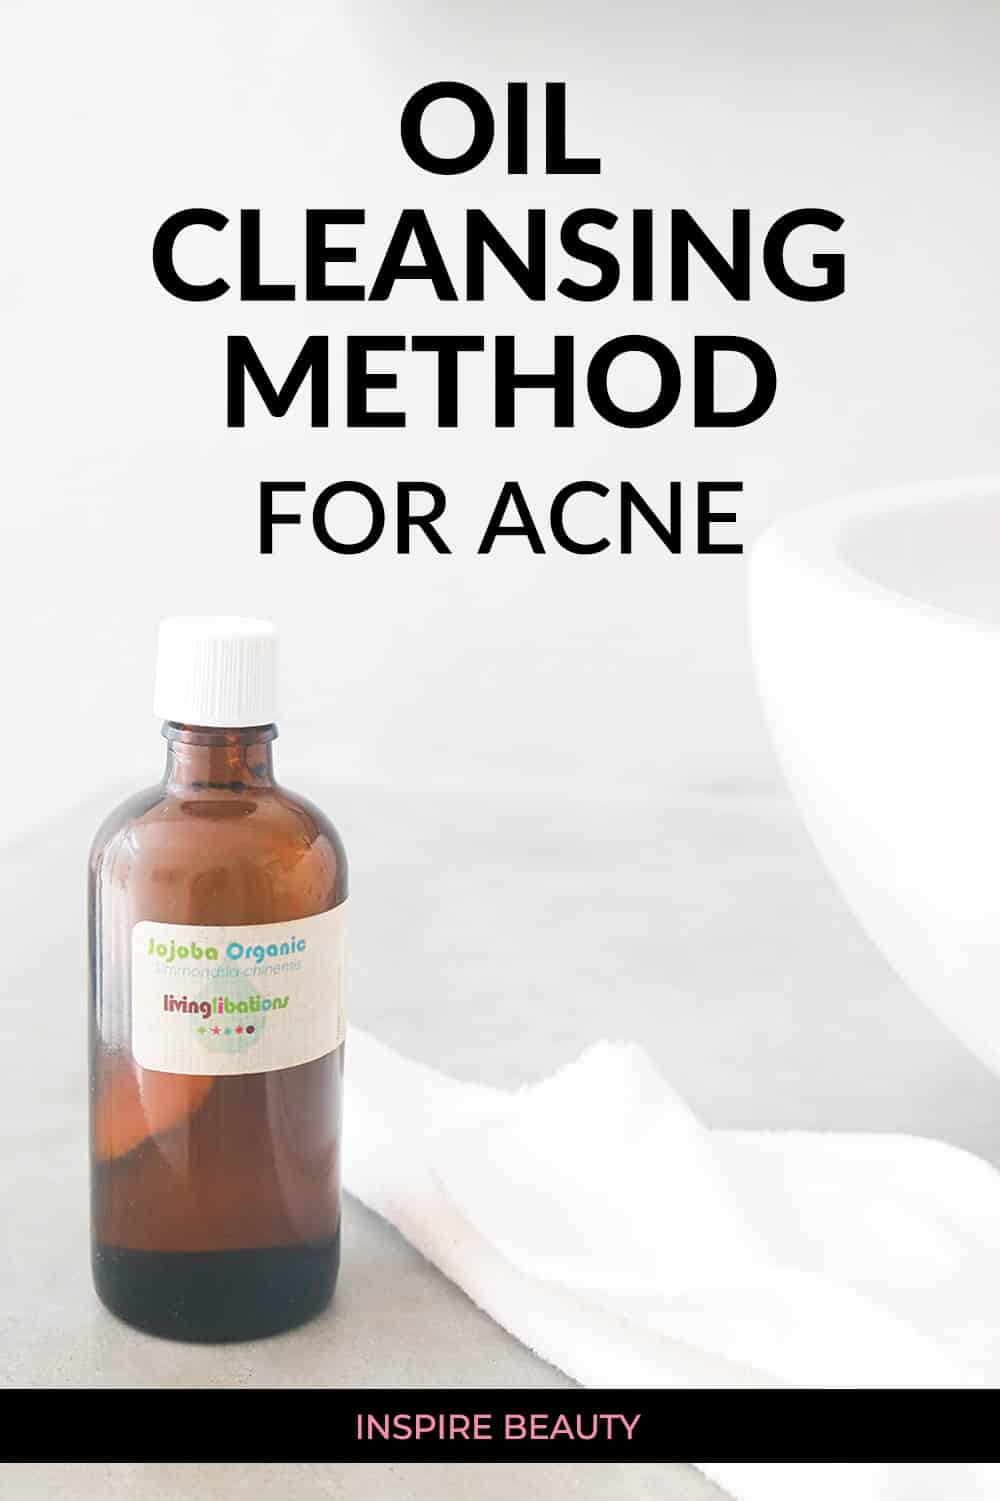 Oil cleansing method for acne, plus oil cleansing method instrcutions, purging, video demo, and tips